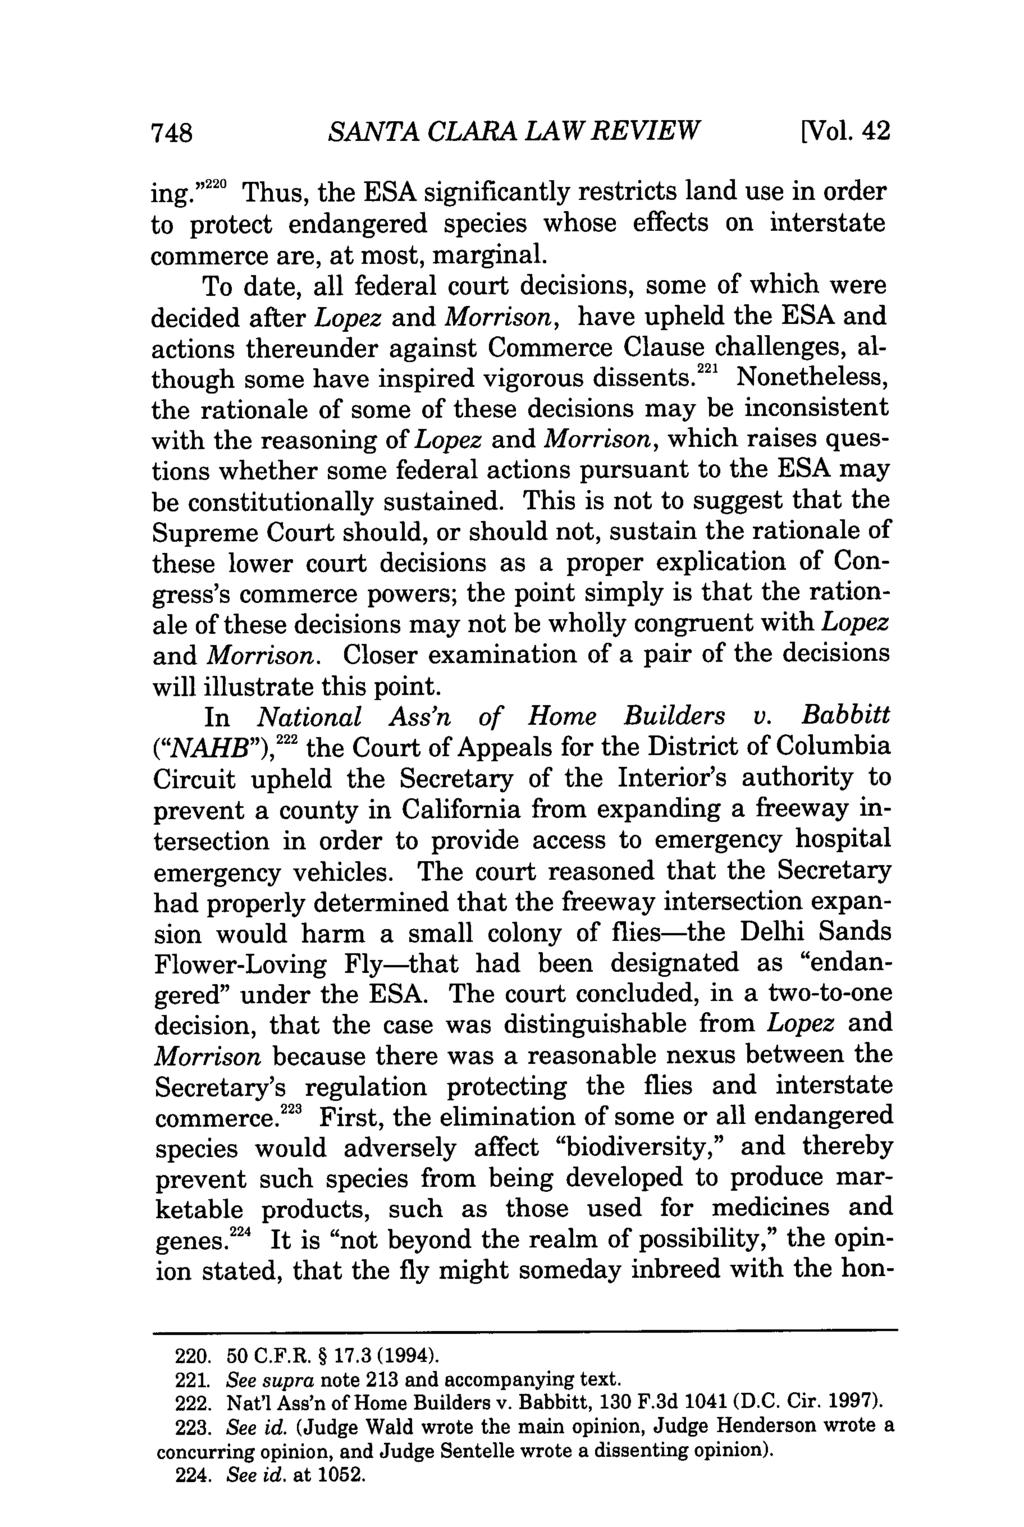 748 SANTA CLARA LAW REVIEW [Vol. 42 ing. " "' Thus, the ESA significantly restricts land use in order to protect endangered species whose effects on interstate commerce are, at most, marginal.